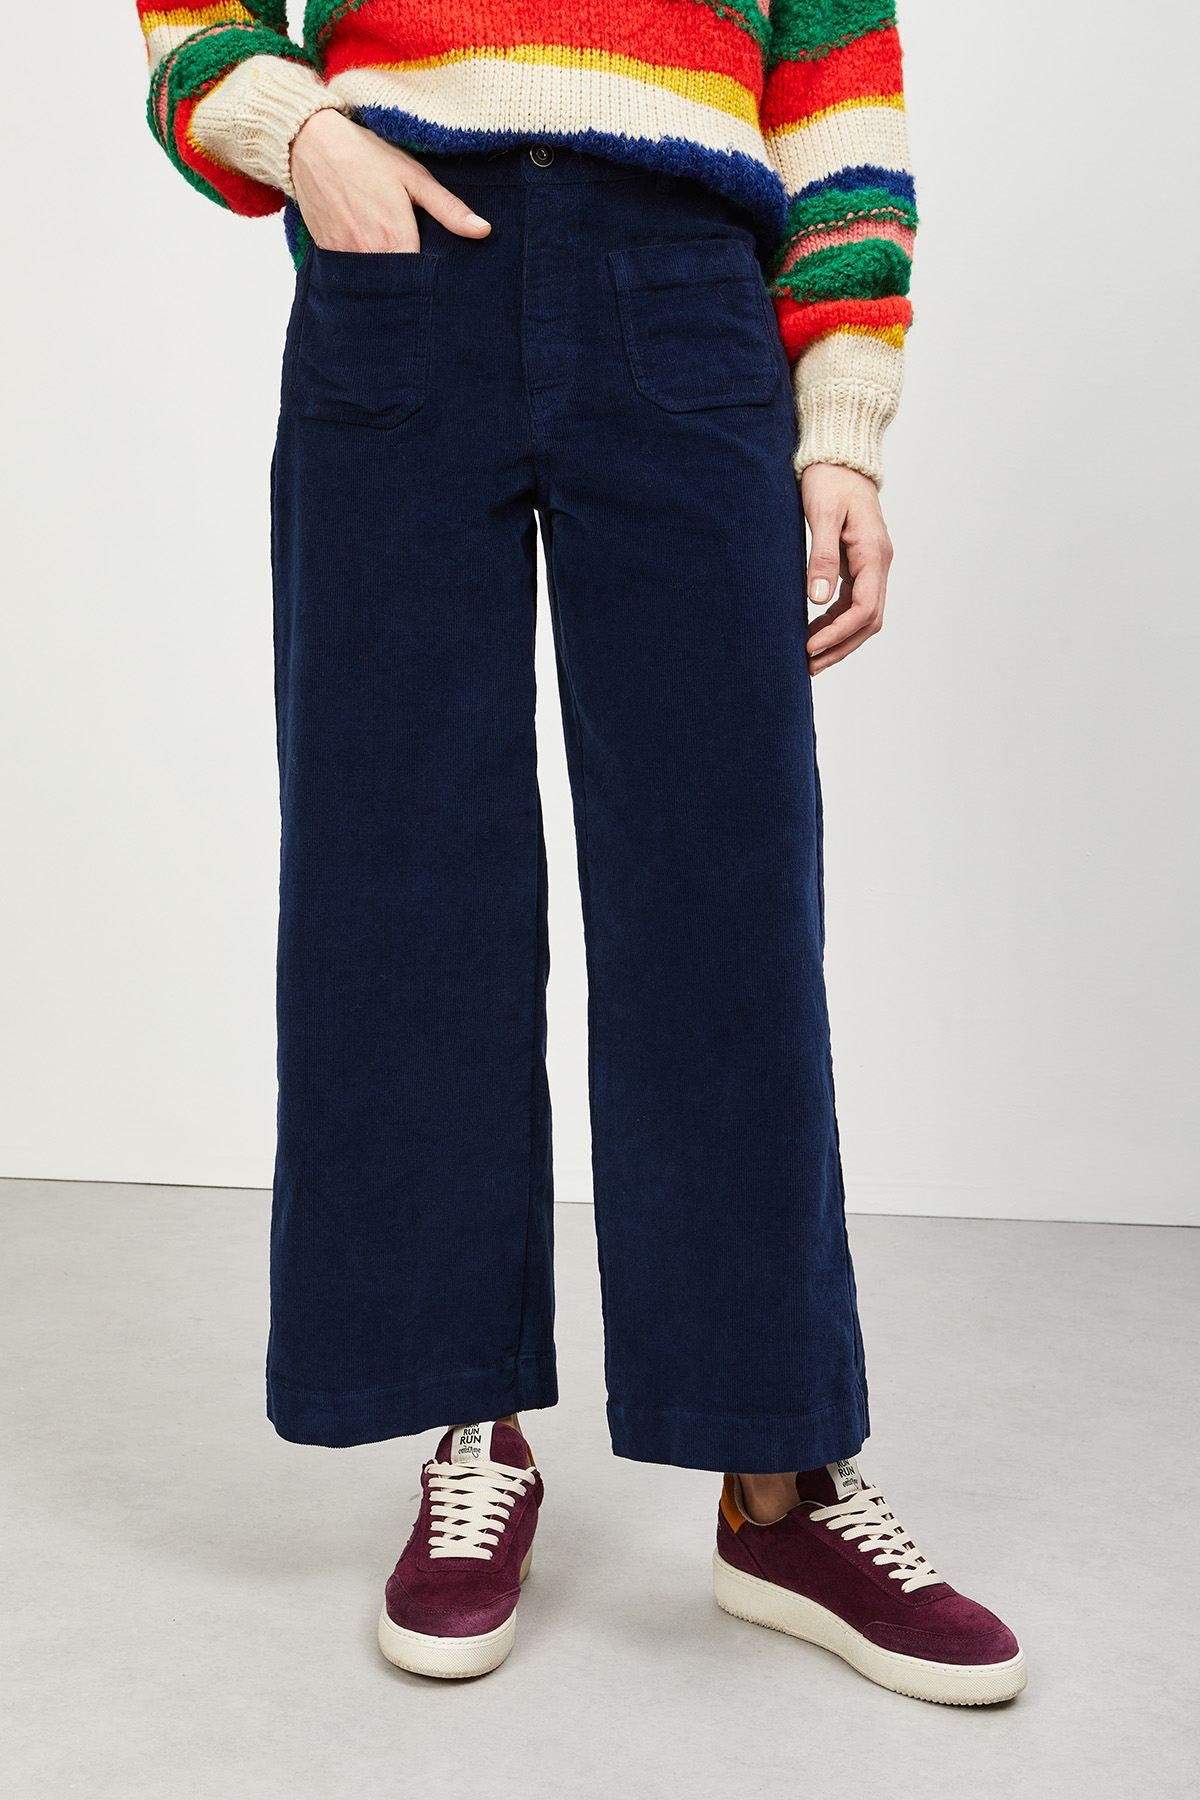 Cropped French jeans